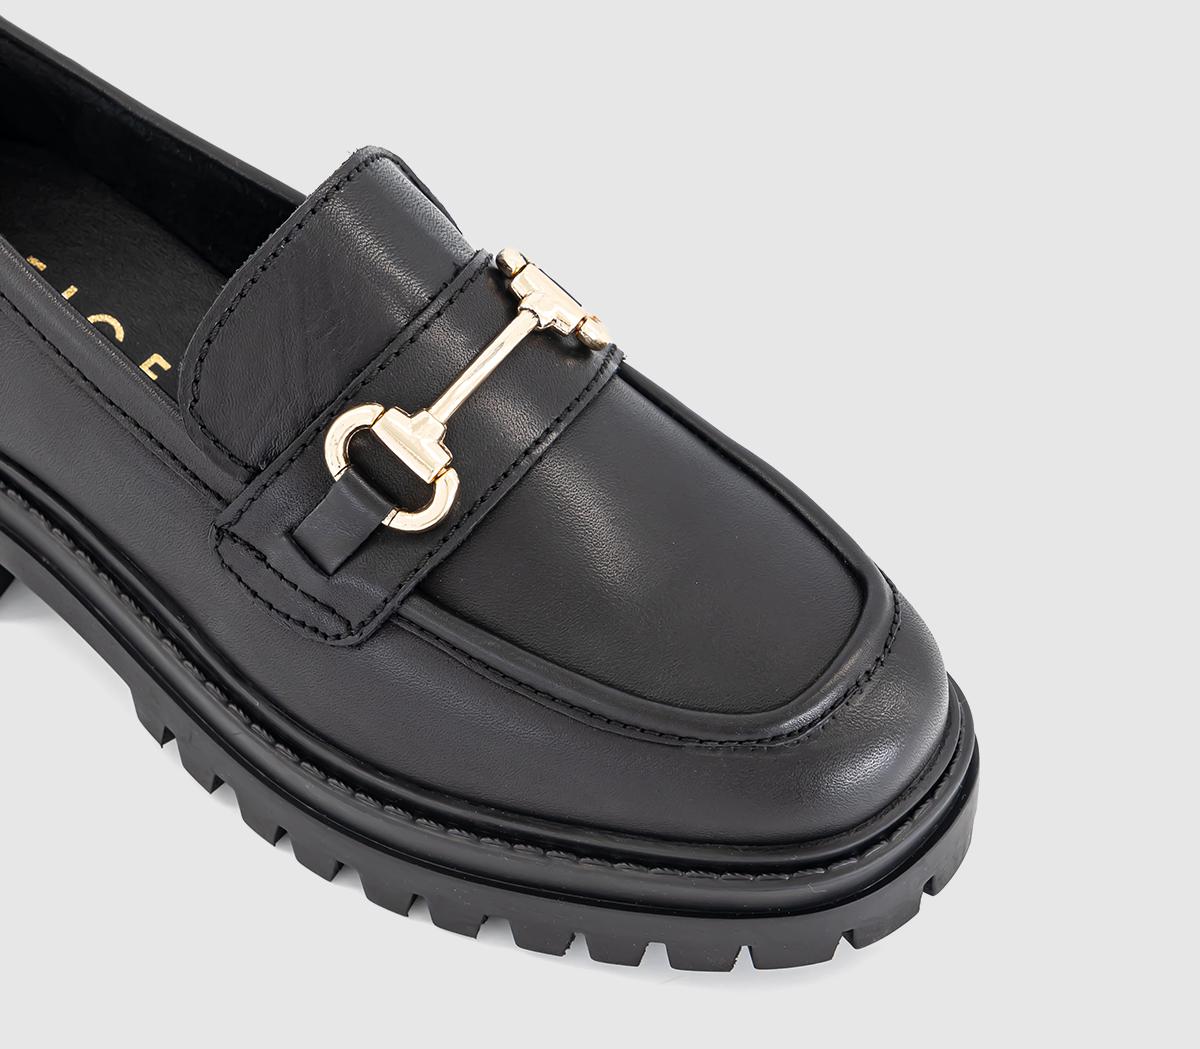 OFFICE Fairhope Chunky Snaffle Trim Loafers Black Leather - Flat Shoes ...